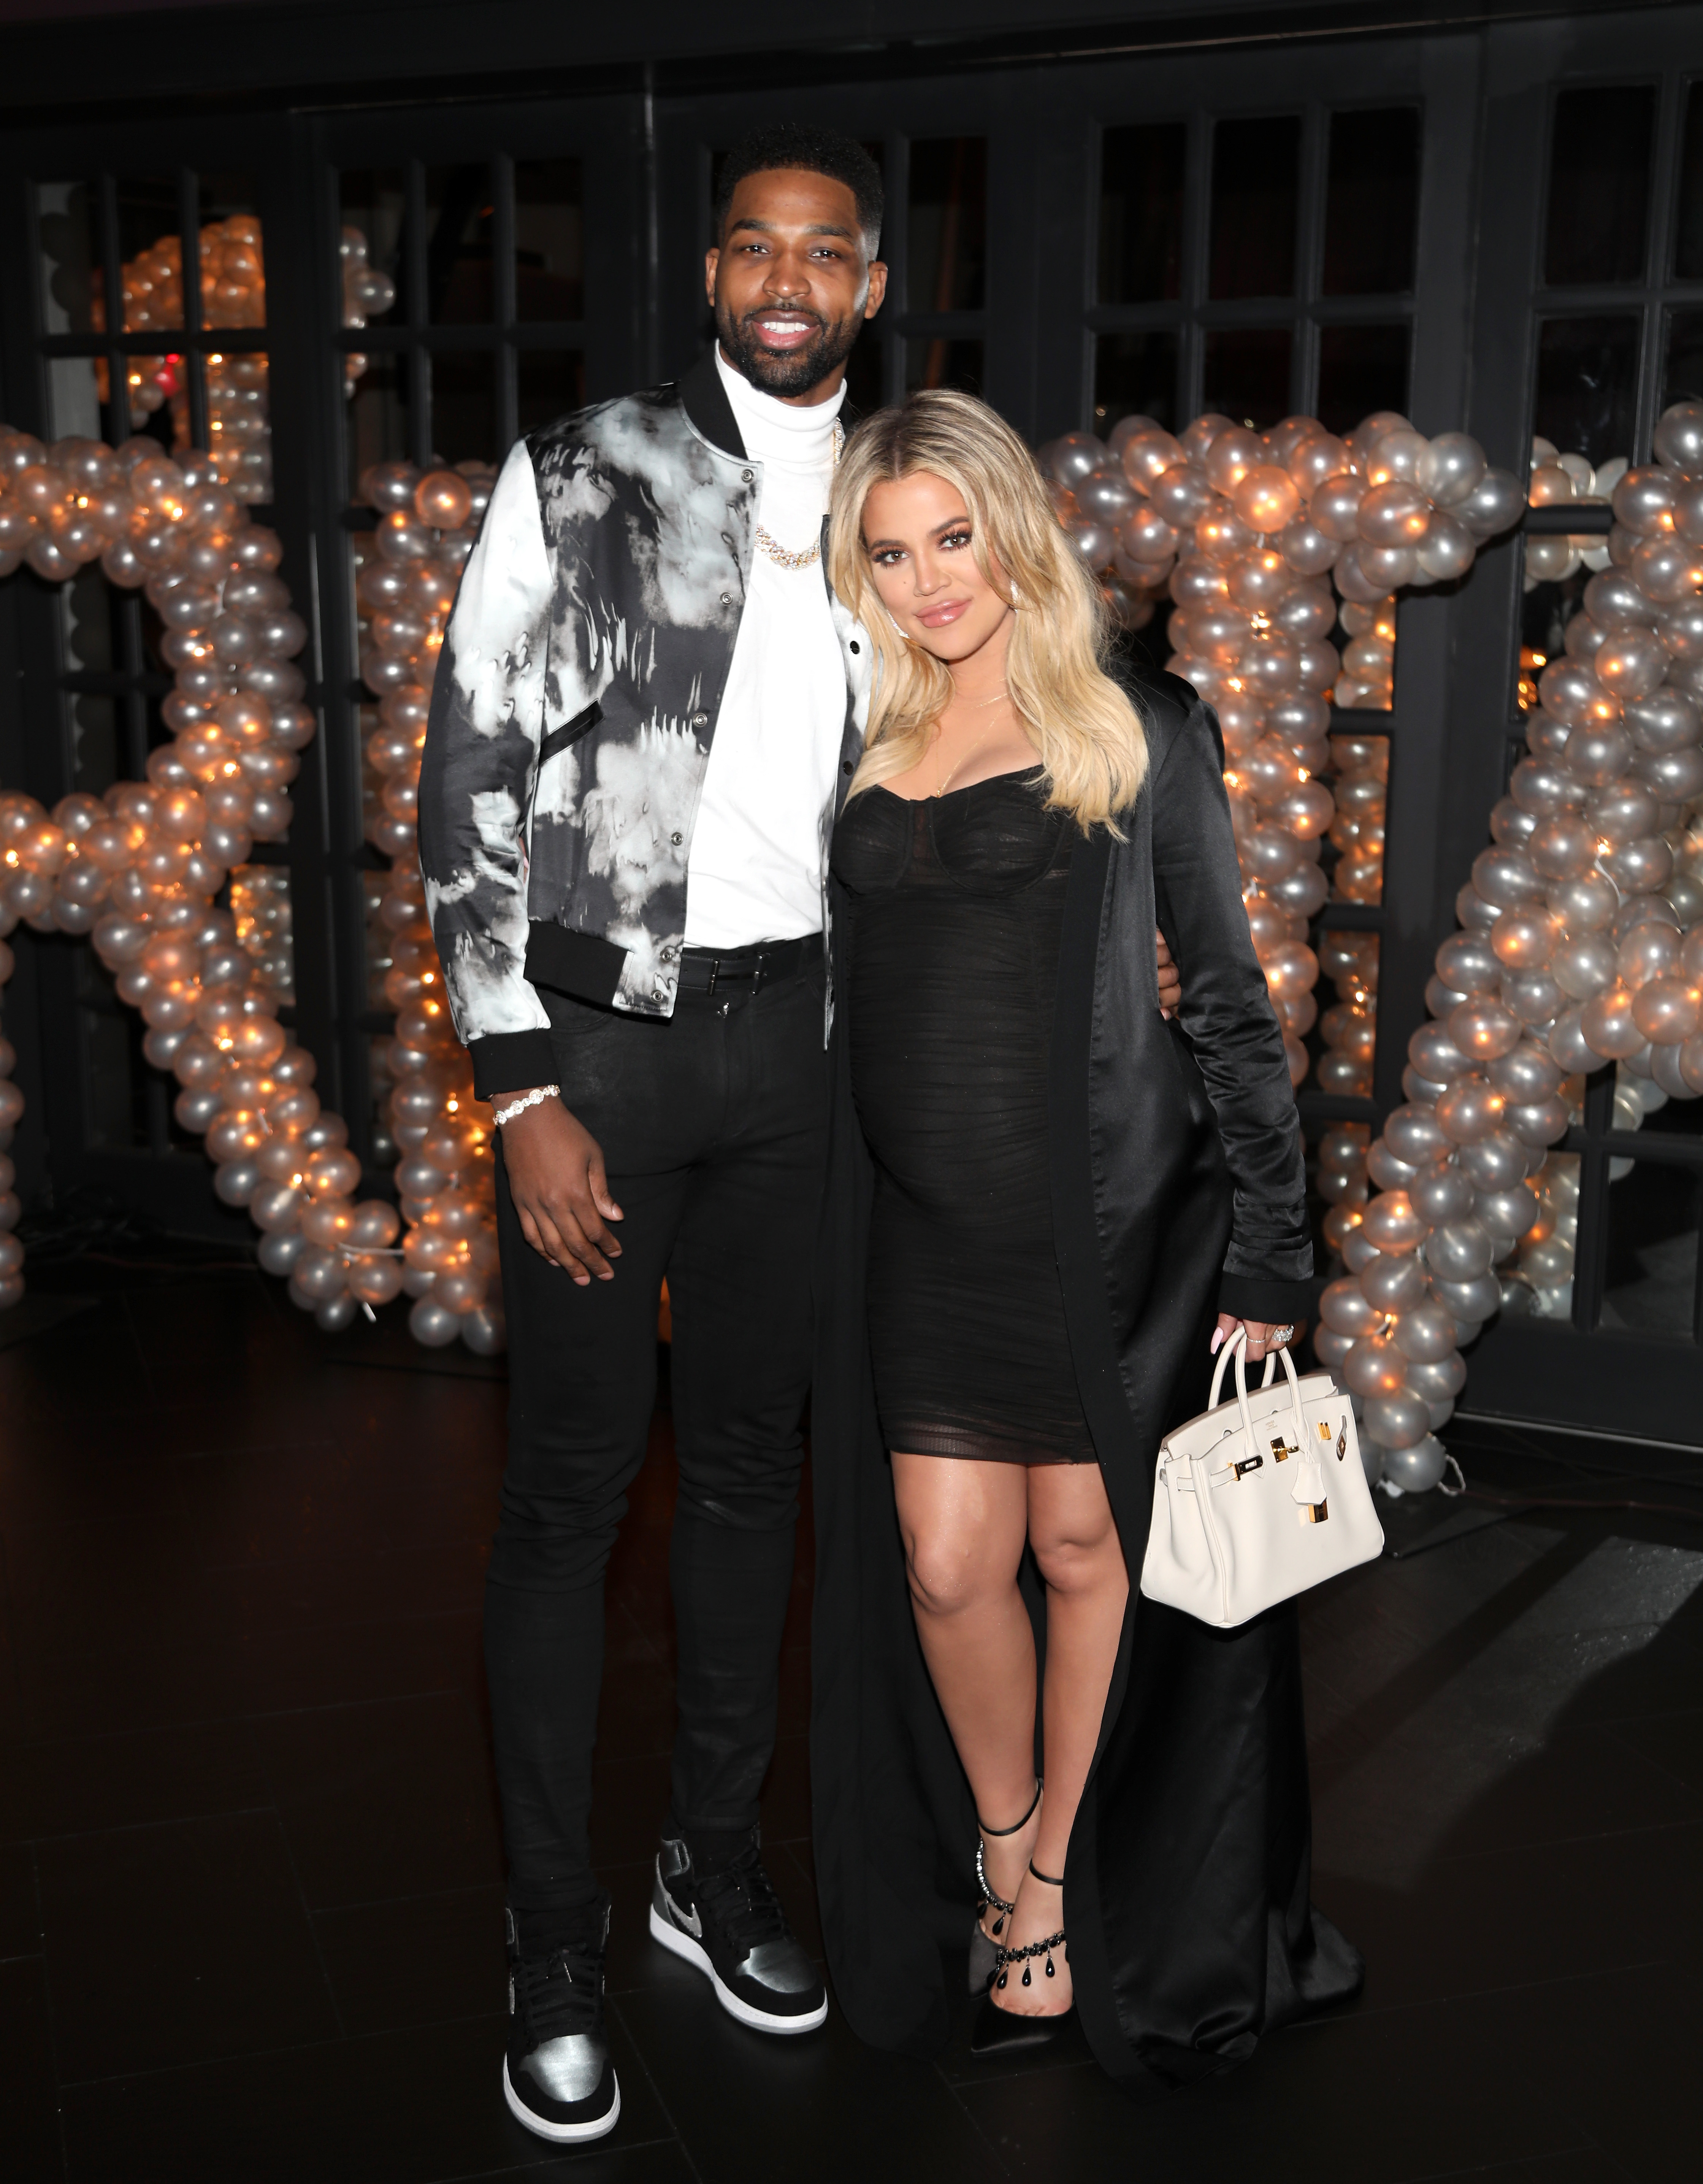 Tristan notoriously welcomed a son with another woman at the end of 2021 while he was still exclusive with Khloe